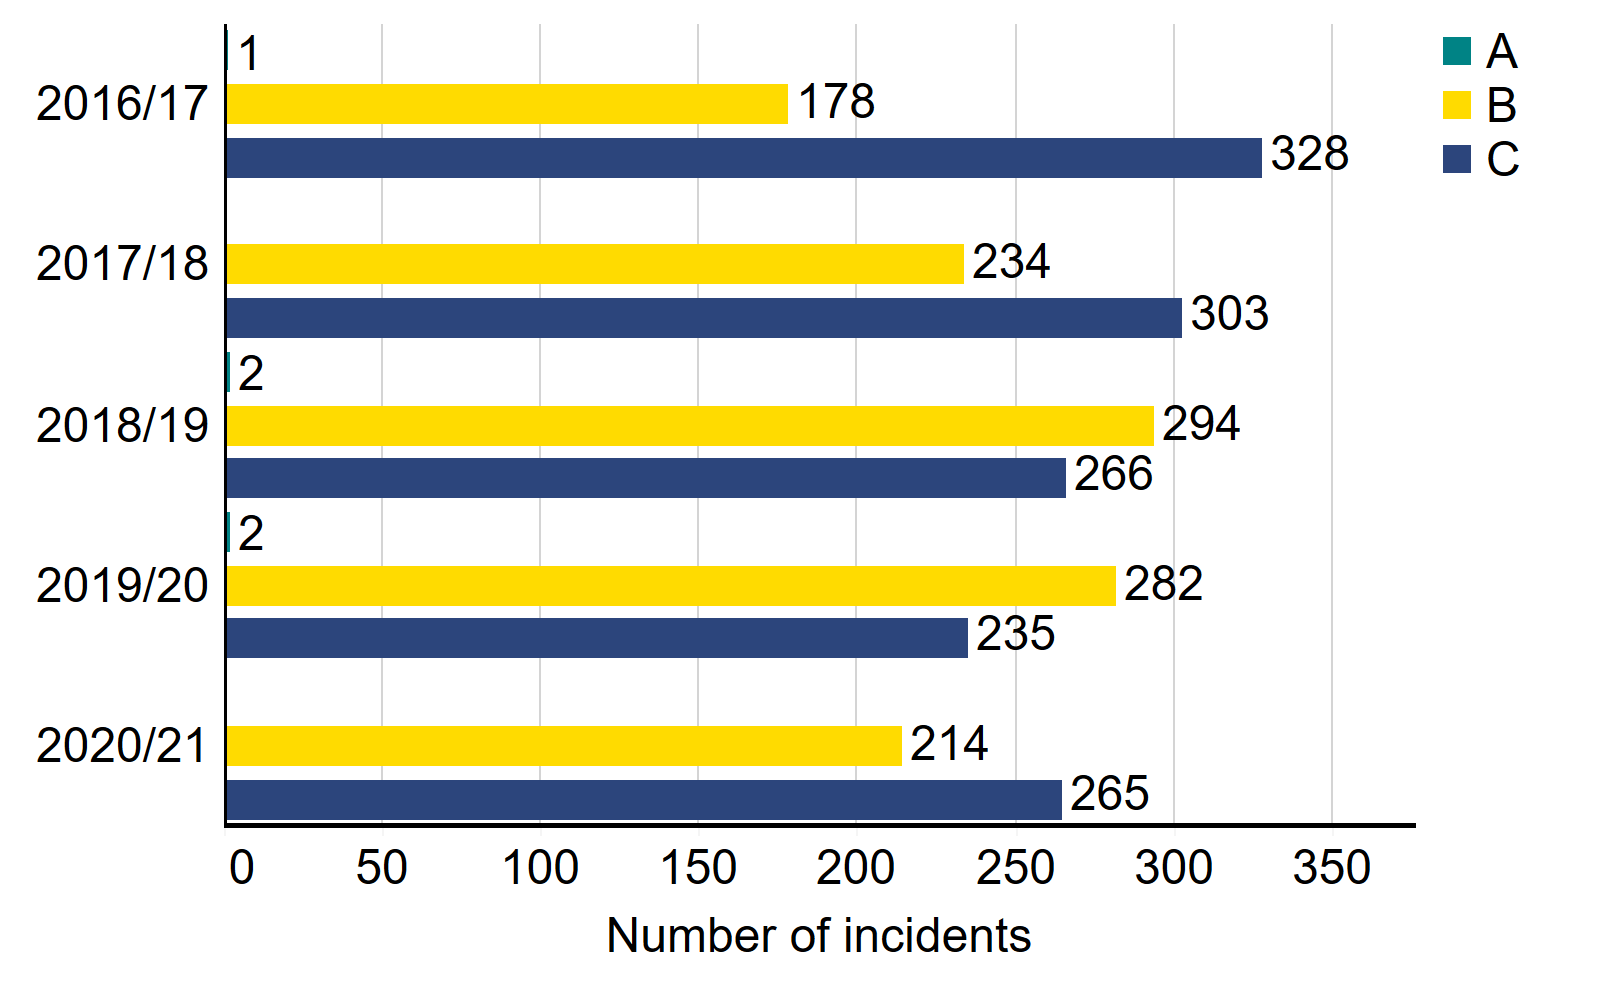 Figure 4: Number of incidents by grade, 2016/17 – 2020/21. Number of incidents by grade, 2016/17 – 2020/21.This bar chart shows the number of incidents by grade; A, B, C, from 2016/17 to 2020/2021. The number of category A incidents has remained low, 0 were recorded in 2020/2021. The number of category B incidents has decreased since 2018/19 from 294 to 214 in 2020/21. The number of category C incidents has increased from 235 in 2019/20, to 265 in 2020/21. An accessible form of the underlying data for this figure can be downloaded at the start of the report in .xls format.